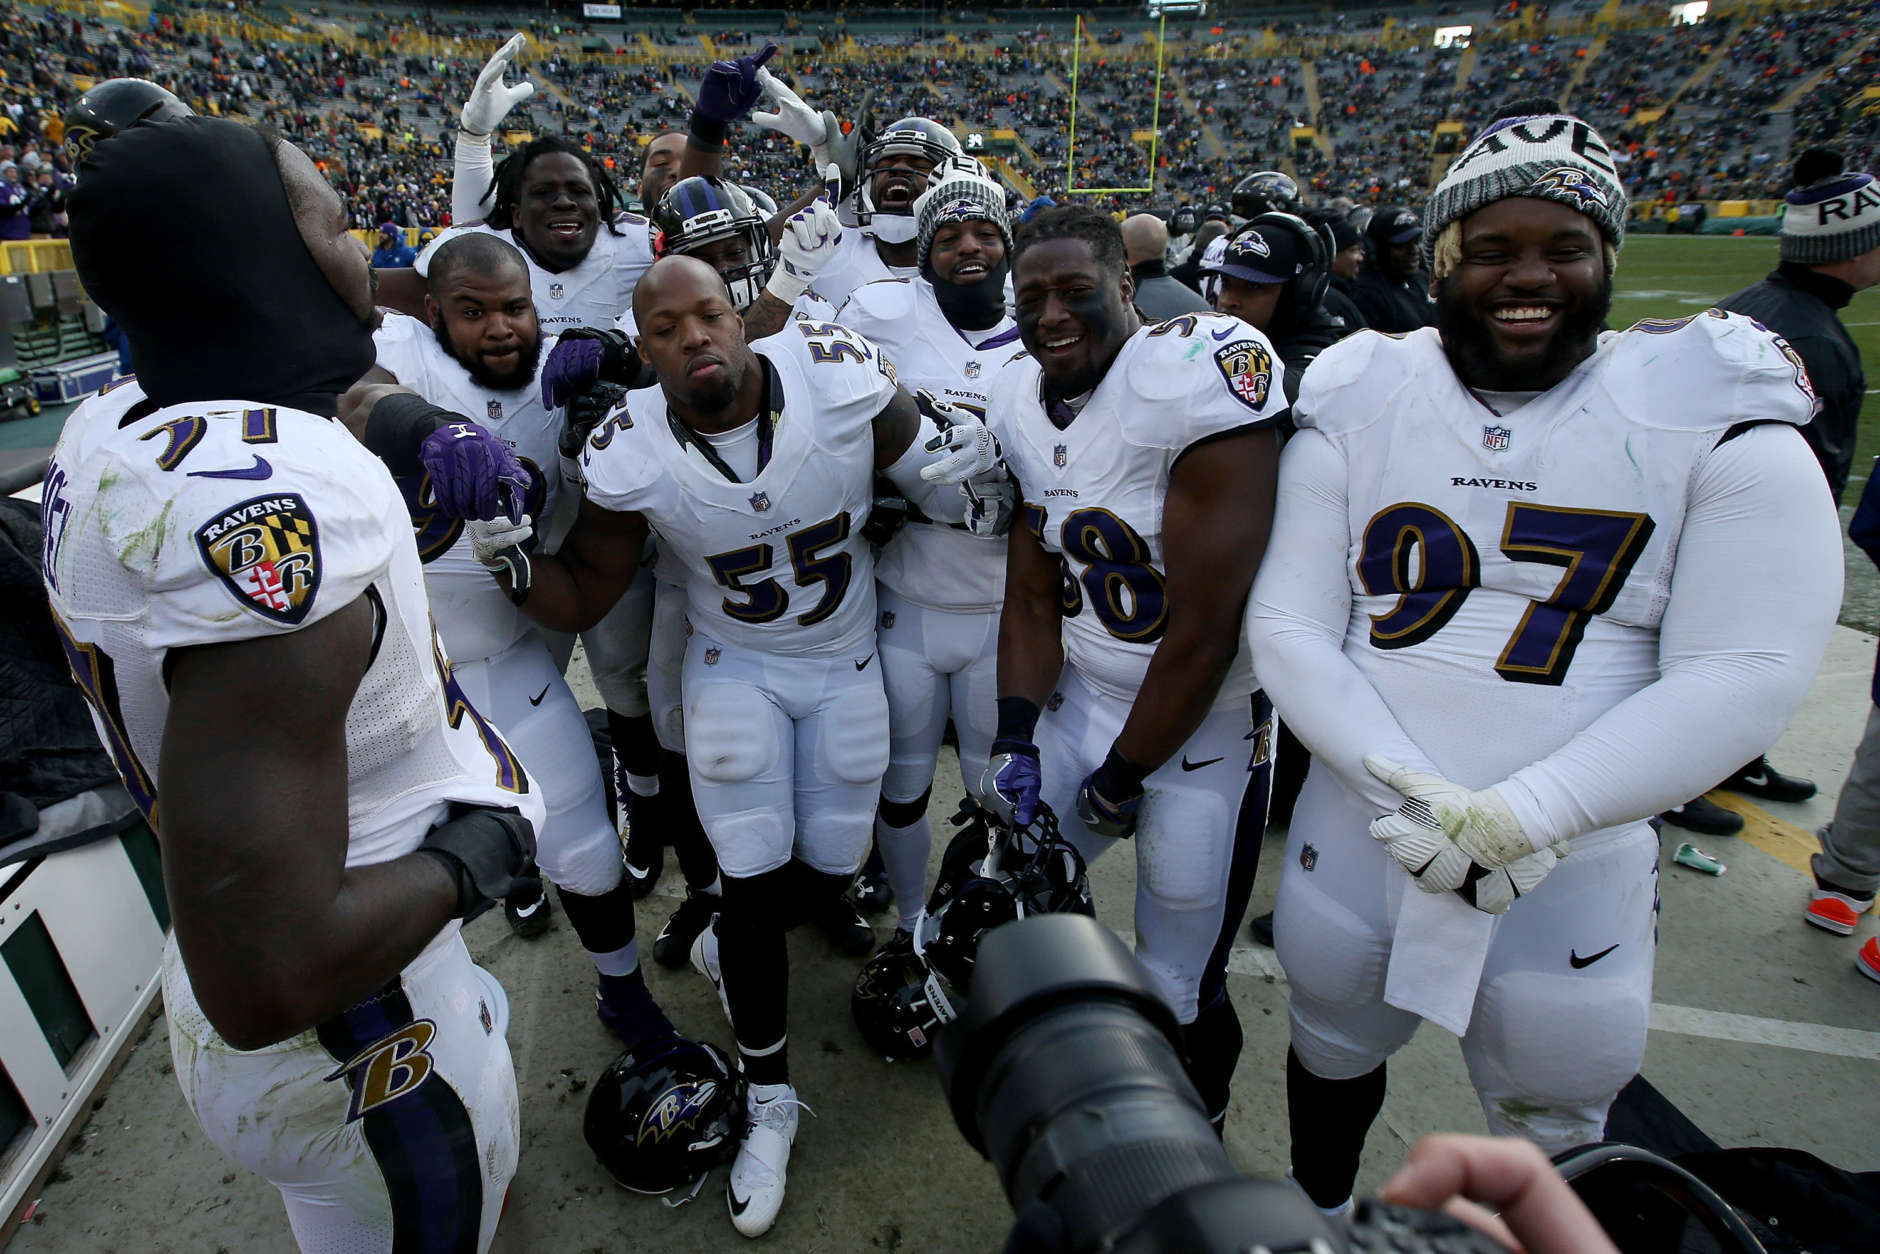 GREEN BAY, WI - NOVEMBER 19:  Members of the Baltimore Ravens celebrate near the end of the game against the Green Bay Packers at Lambeau Field on November 19, 2017 in Green Bay, Wisconsin. (Photo by Dylan Buell/Getty Images)